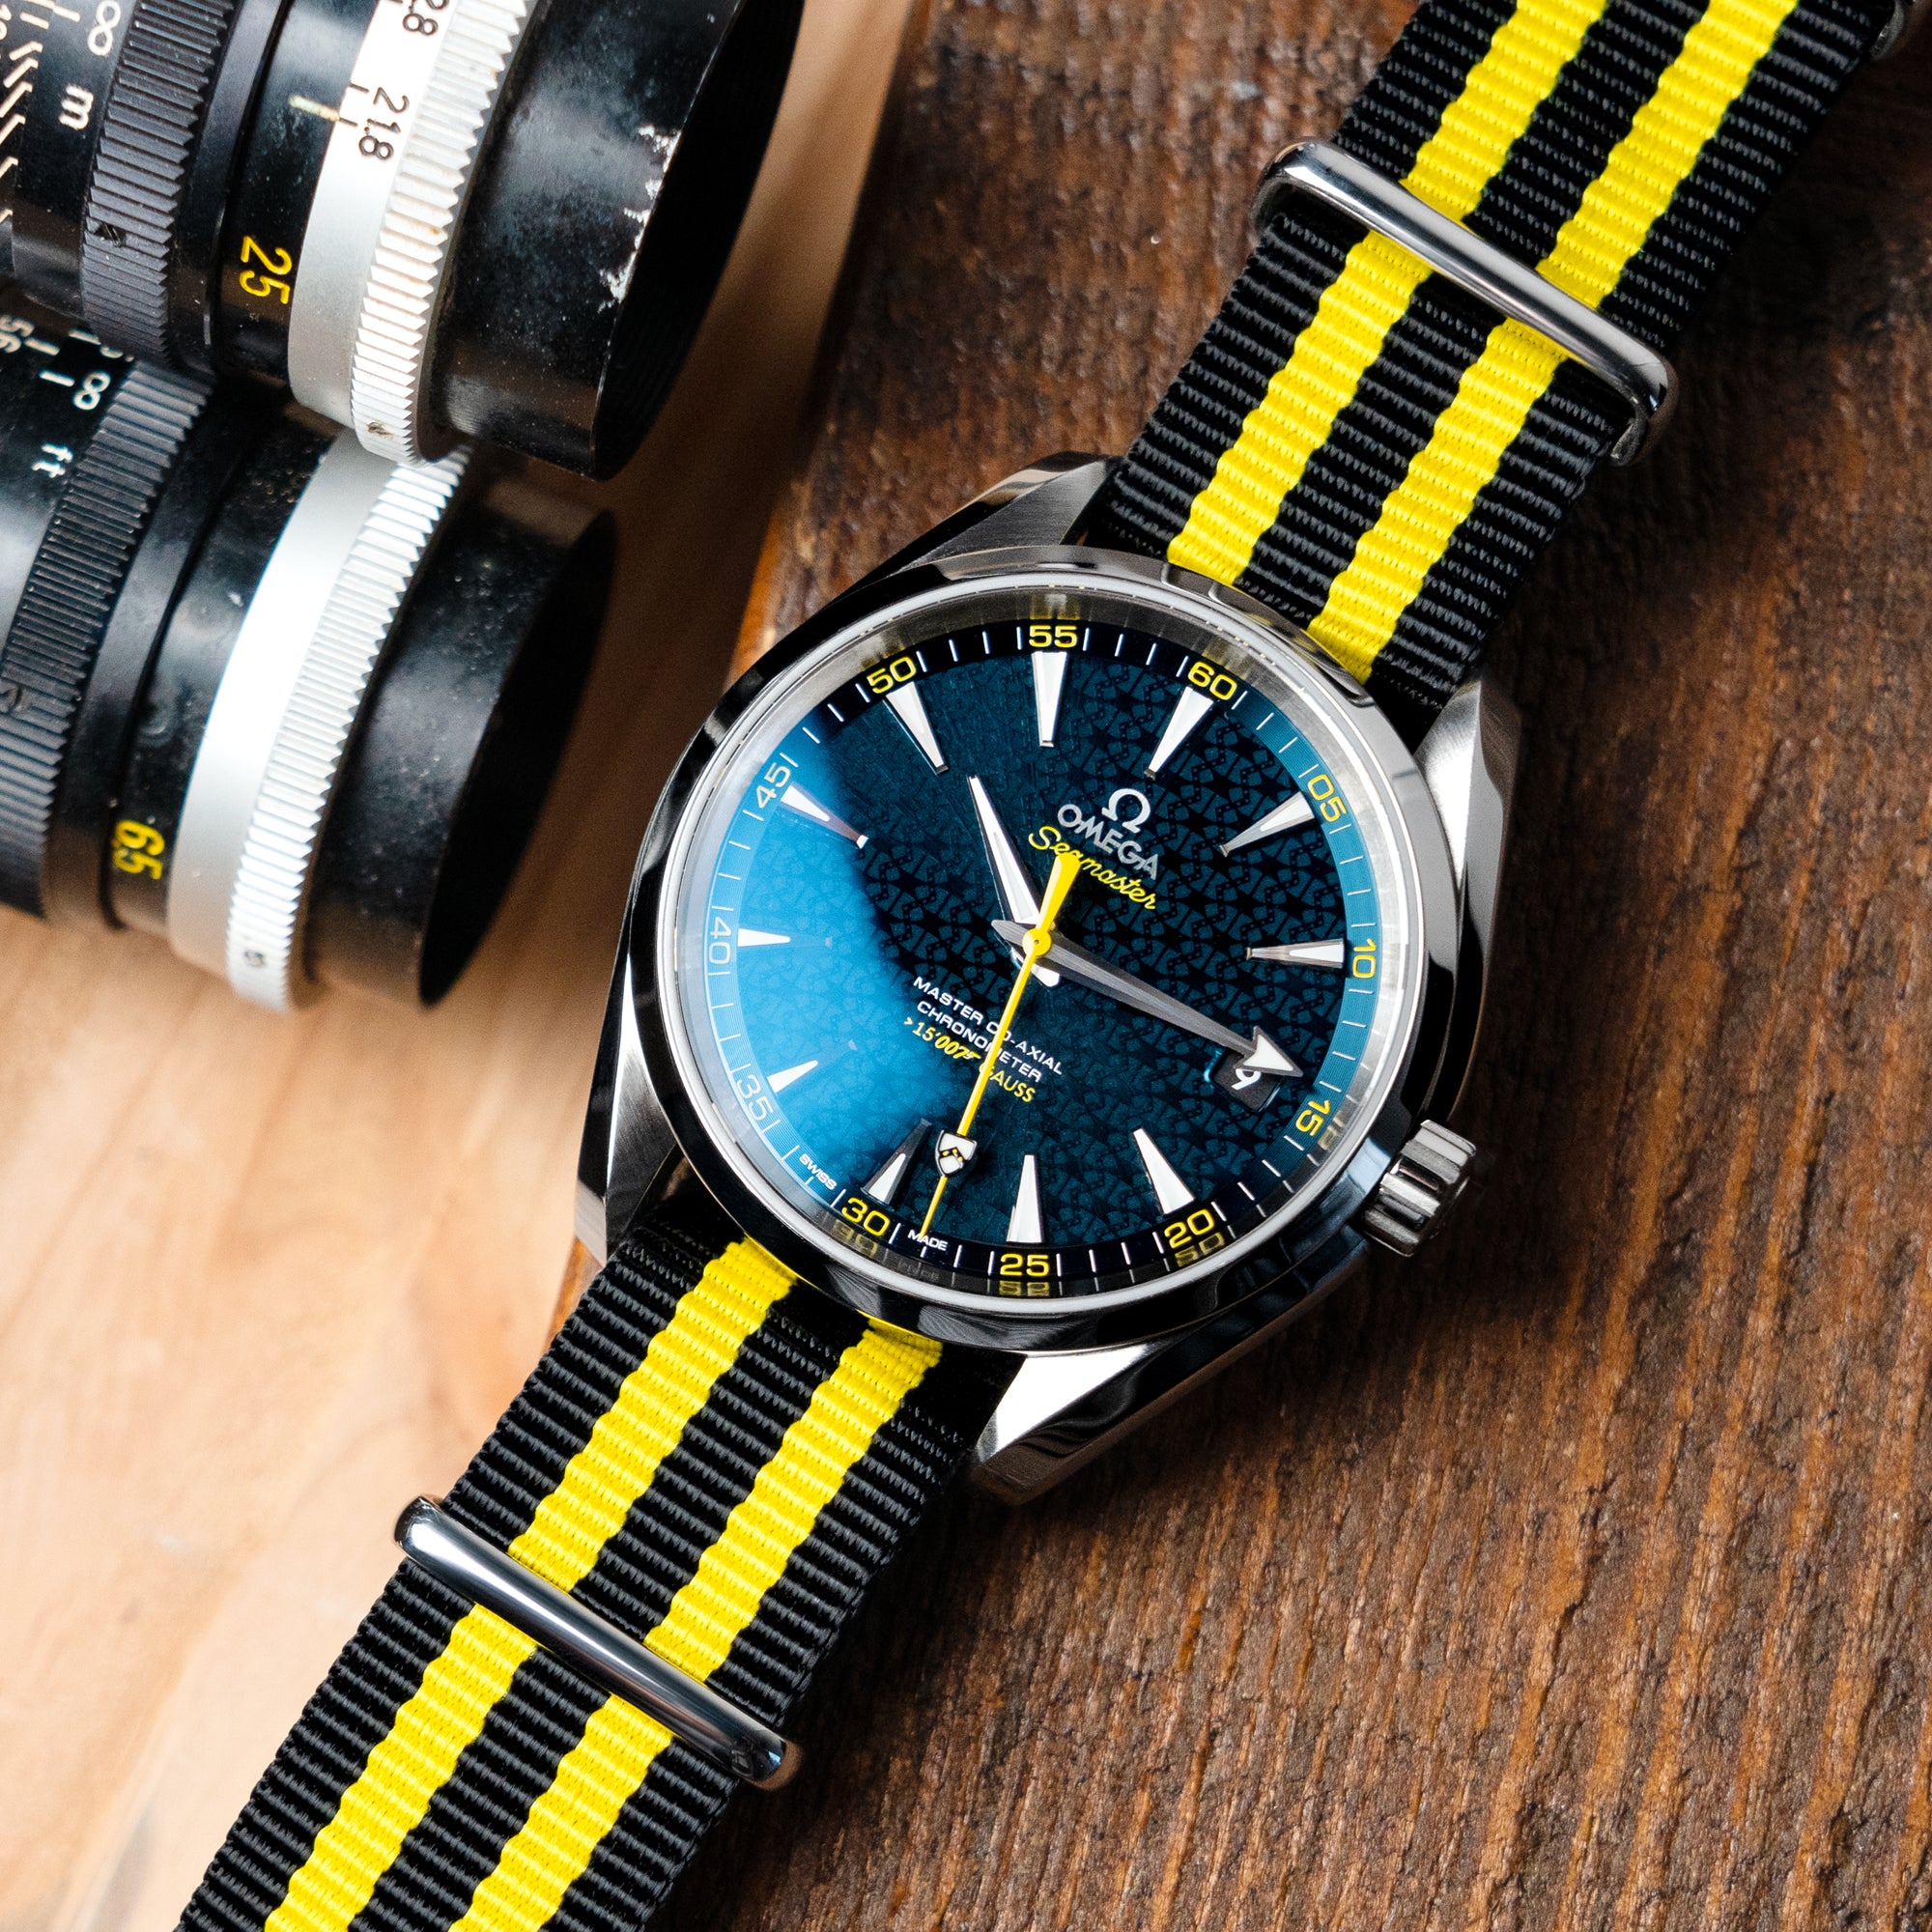 The Omega Seamaster Aqua Terra Black and Yellow NATO James Bond watch strap by Strapcode